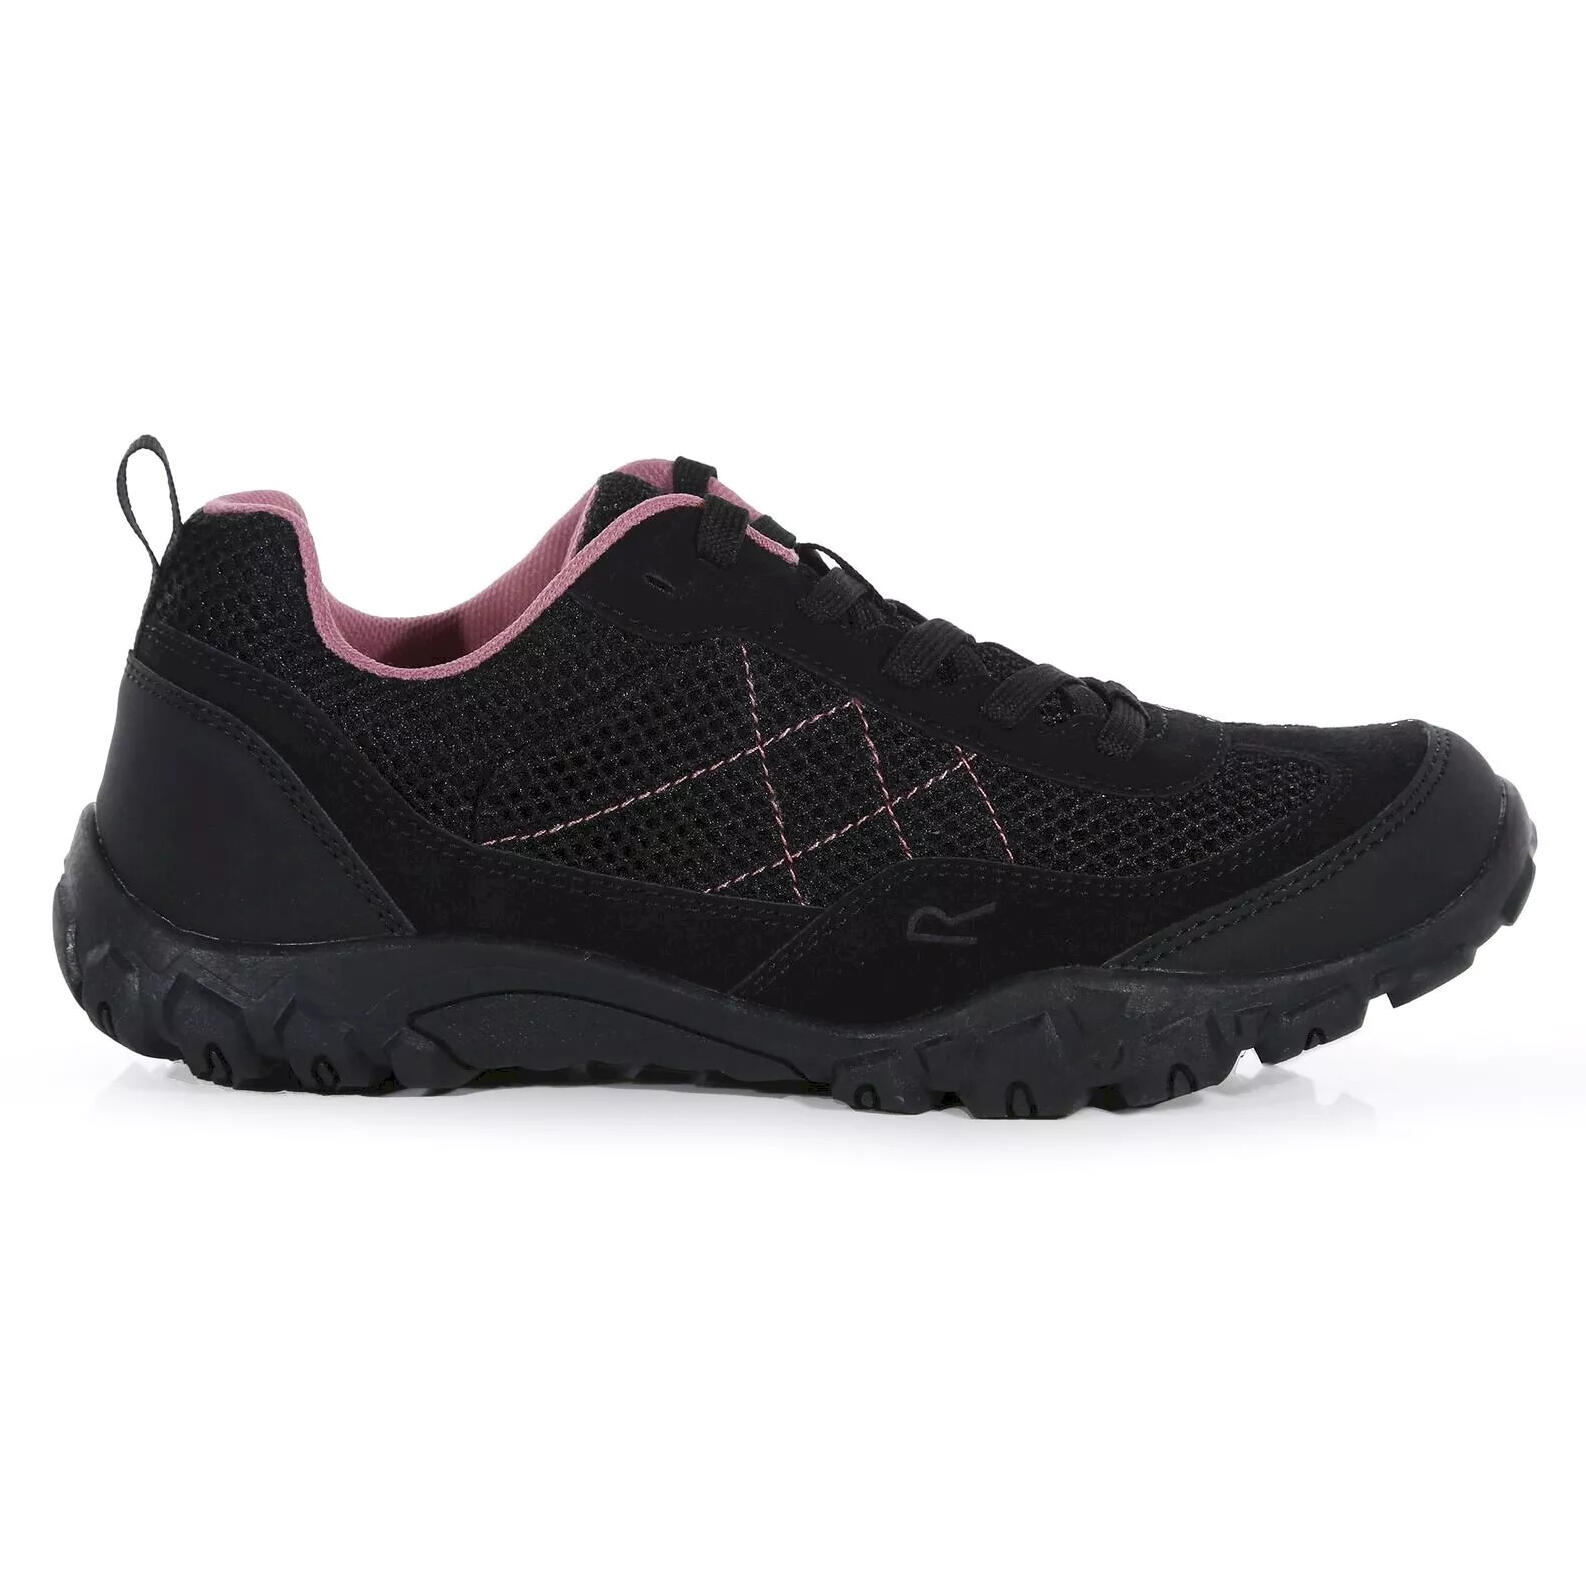 Womens/Ladies Edgepoint Life Walking Shoes (Black/Heather Rose) 4/5